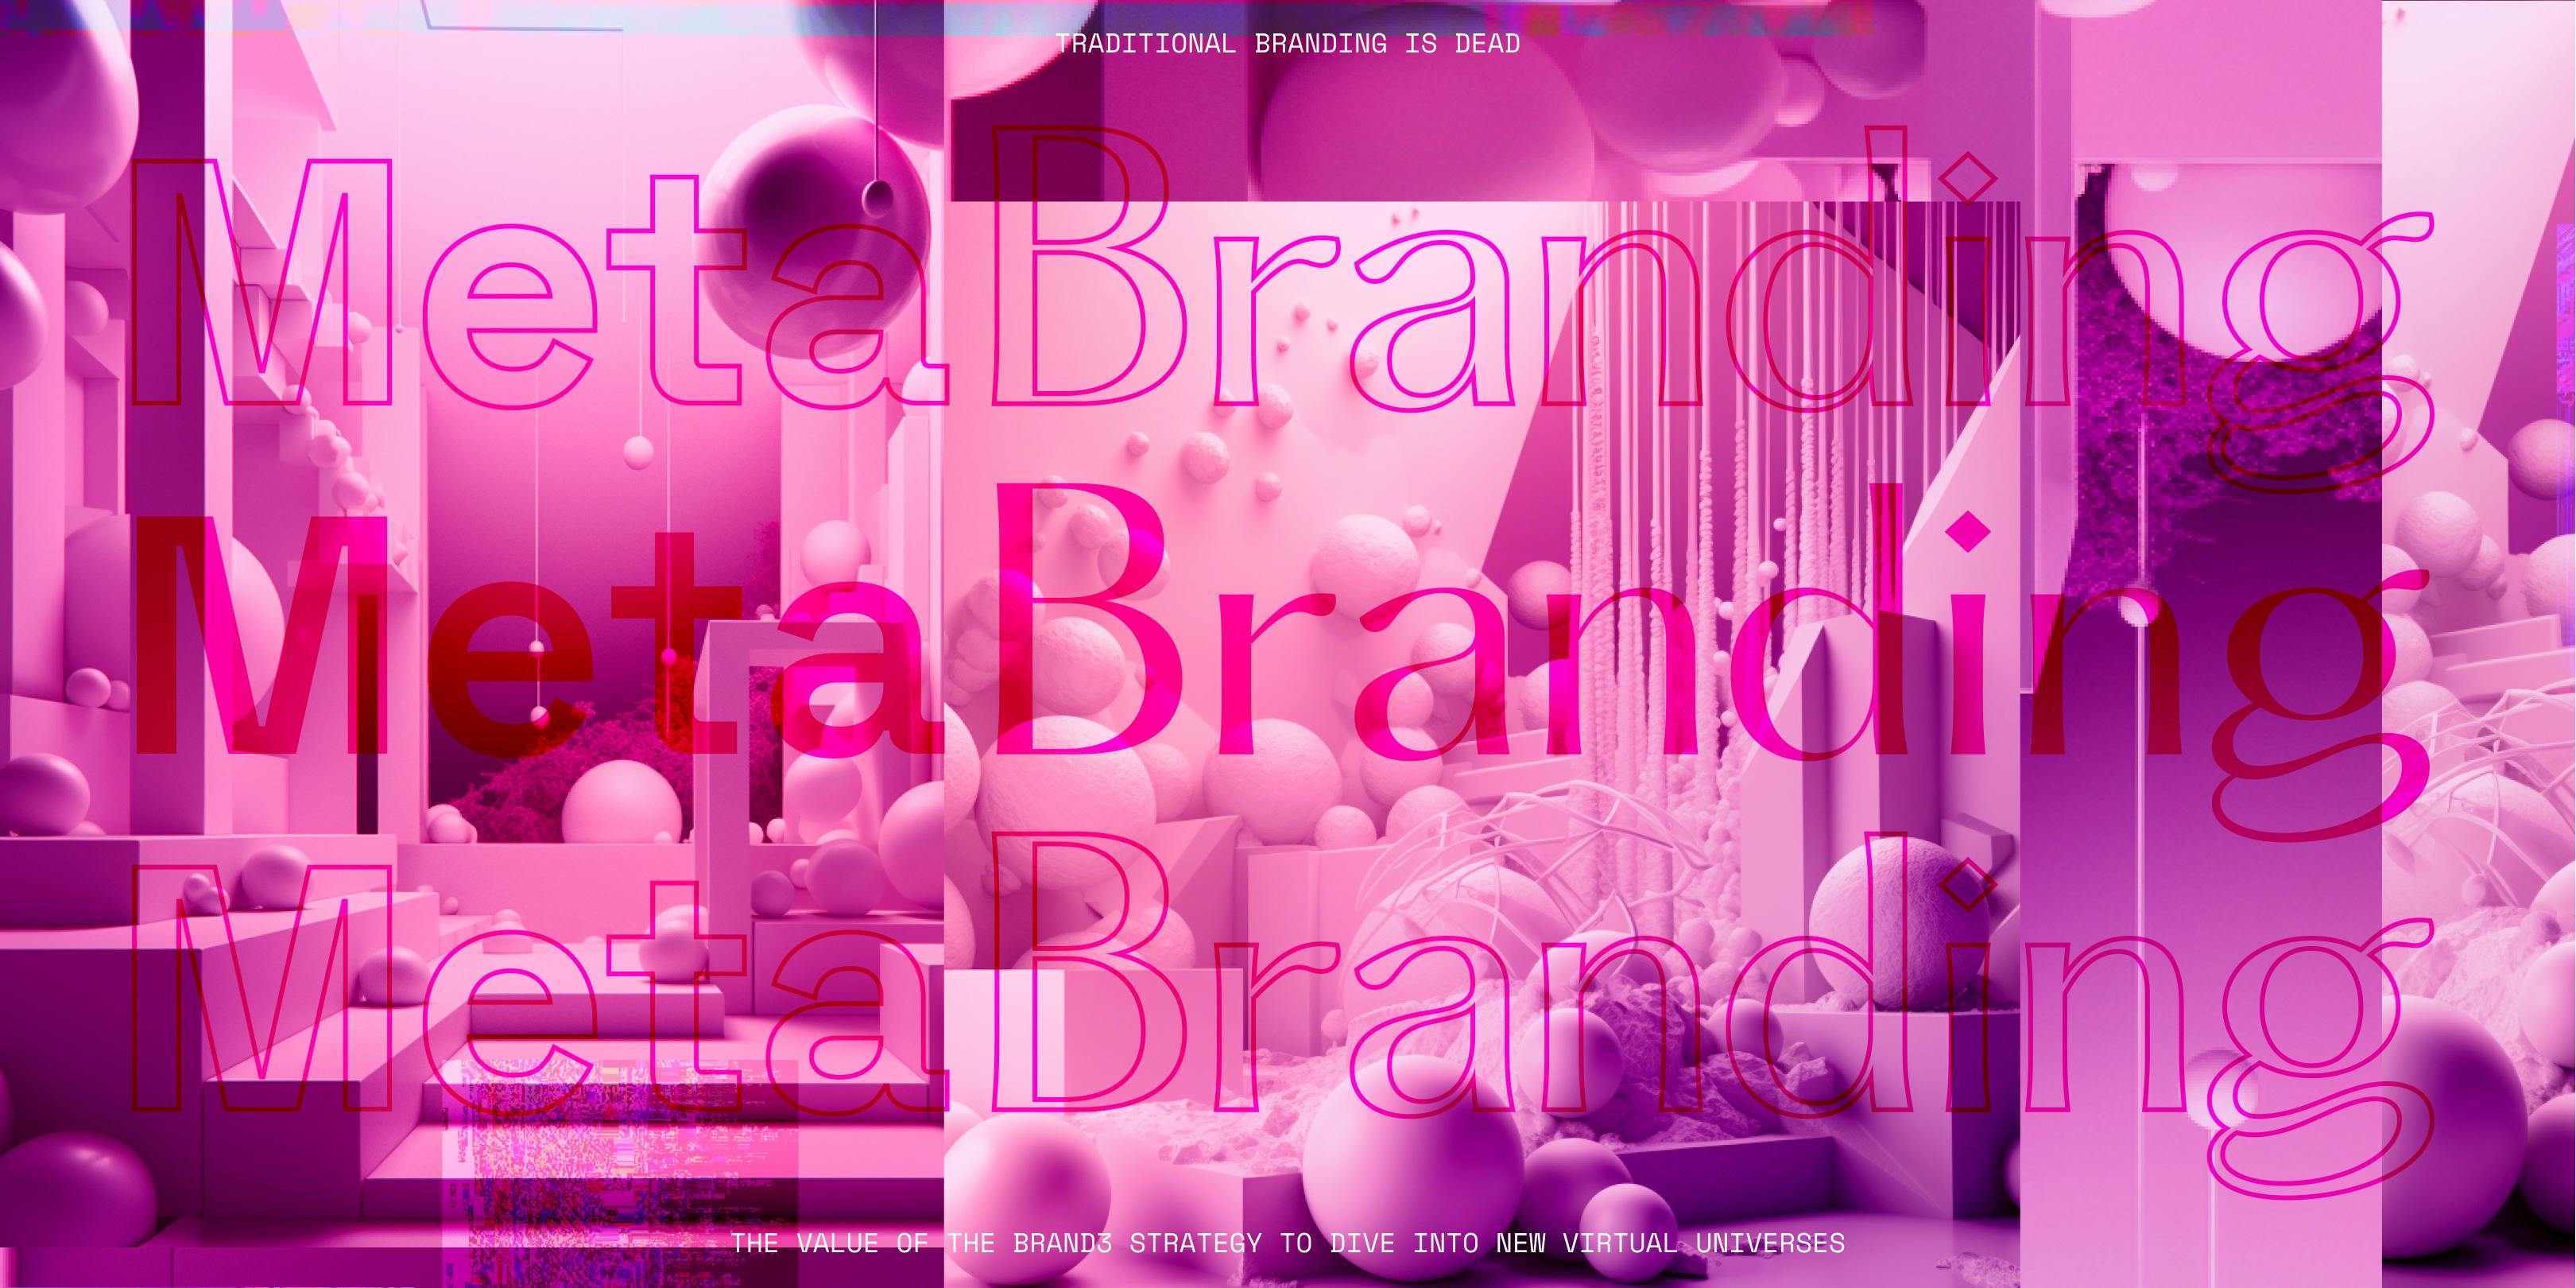 The concept of MetaBranding involves creating a Brand3 directly within the Metaverse